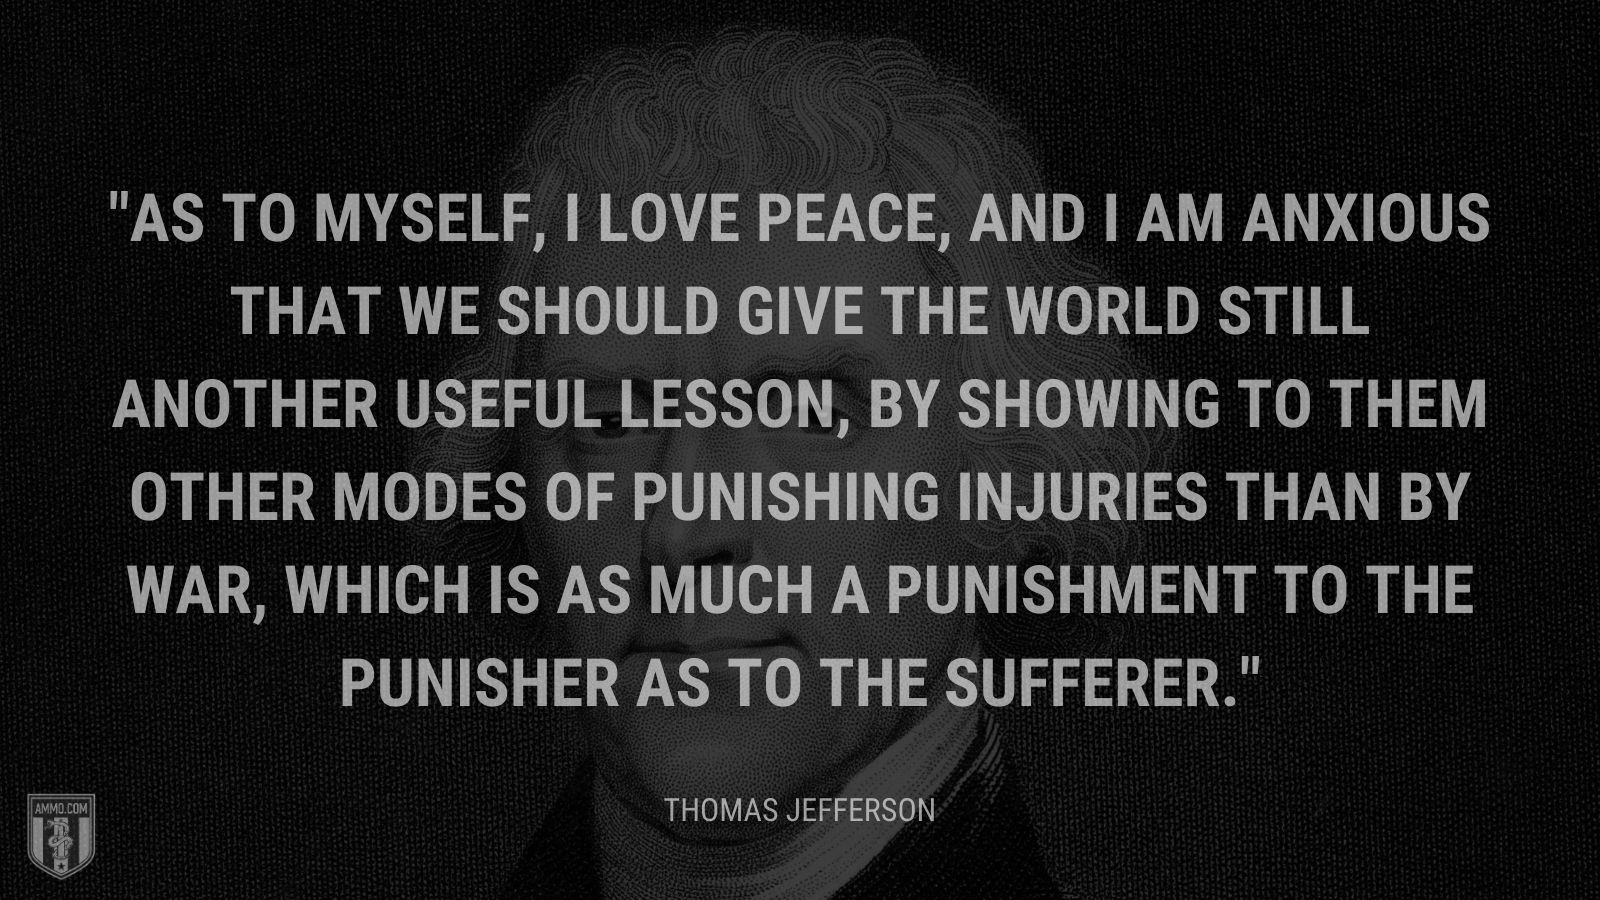 “As to myself, I love peace, and I am anxious that we should give the world still another useful lesson, by showing to them other modes of punishing injuries than by war, which is as much a punishment to the punisher as to the sufferer.” - Thomas Jefferson